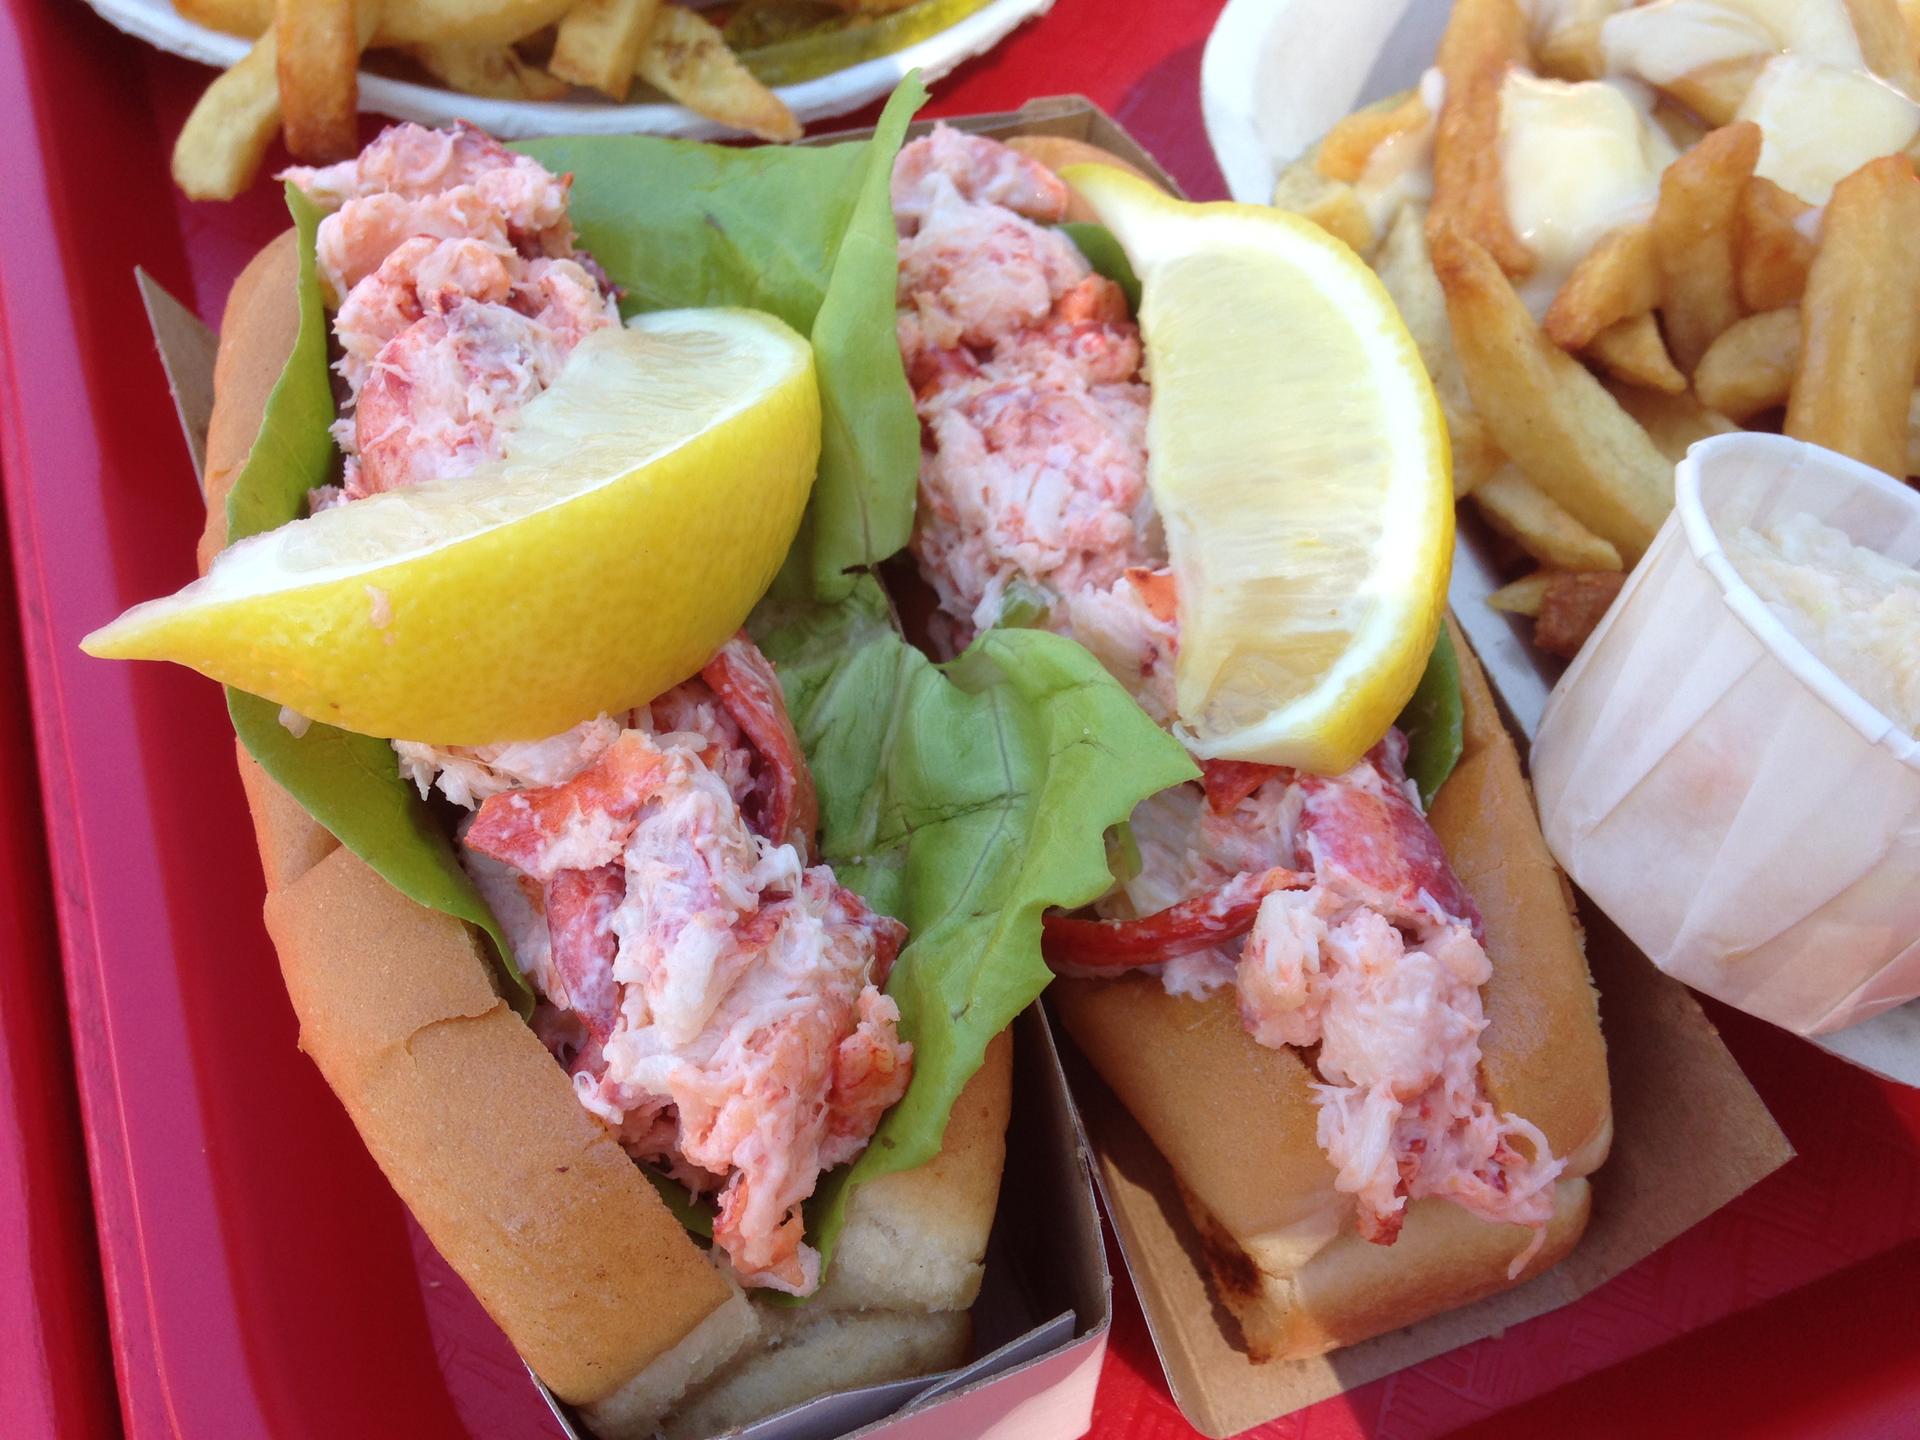 The lobster rolls at The Clam Digger, a restaurant in New Brunswick, Canada